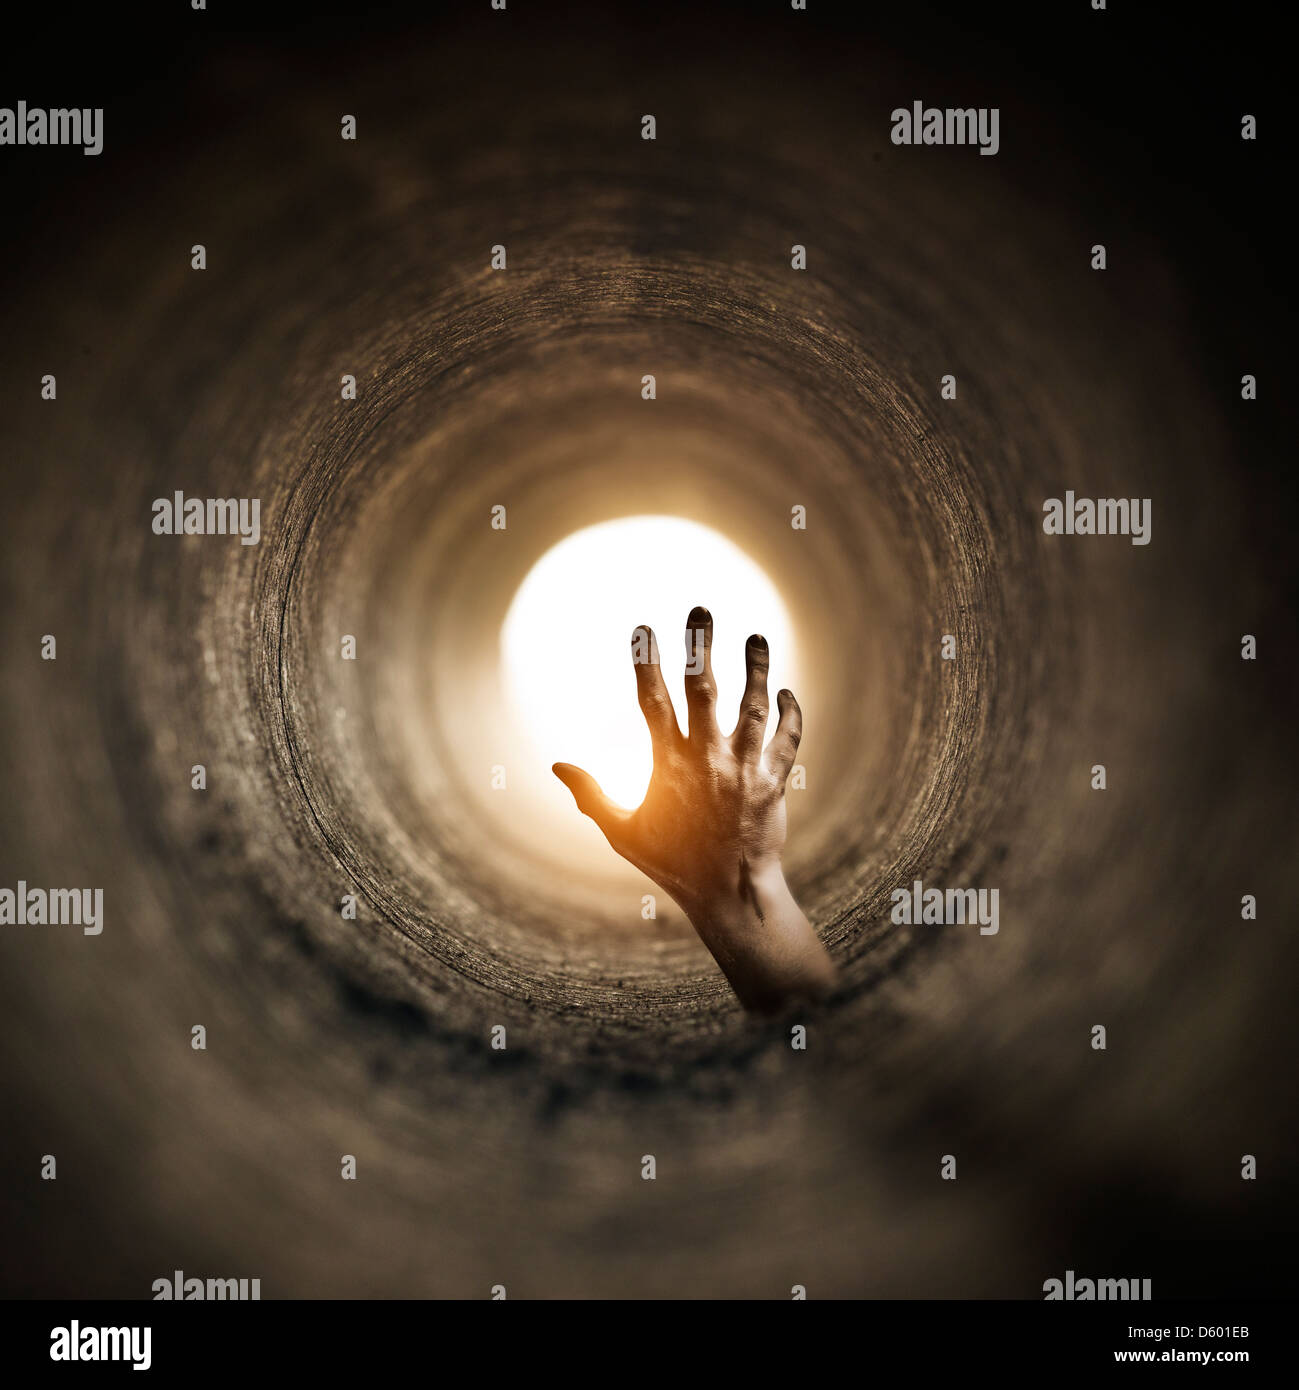 Tunnel Horror. Zombified hand rising up inside a dark tunnel... Stock Photo